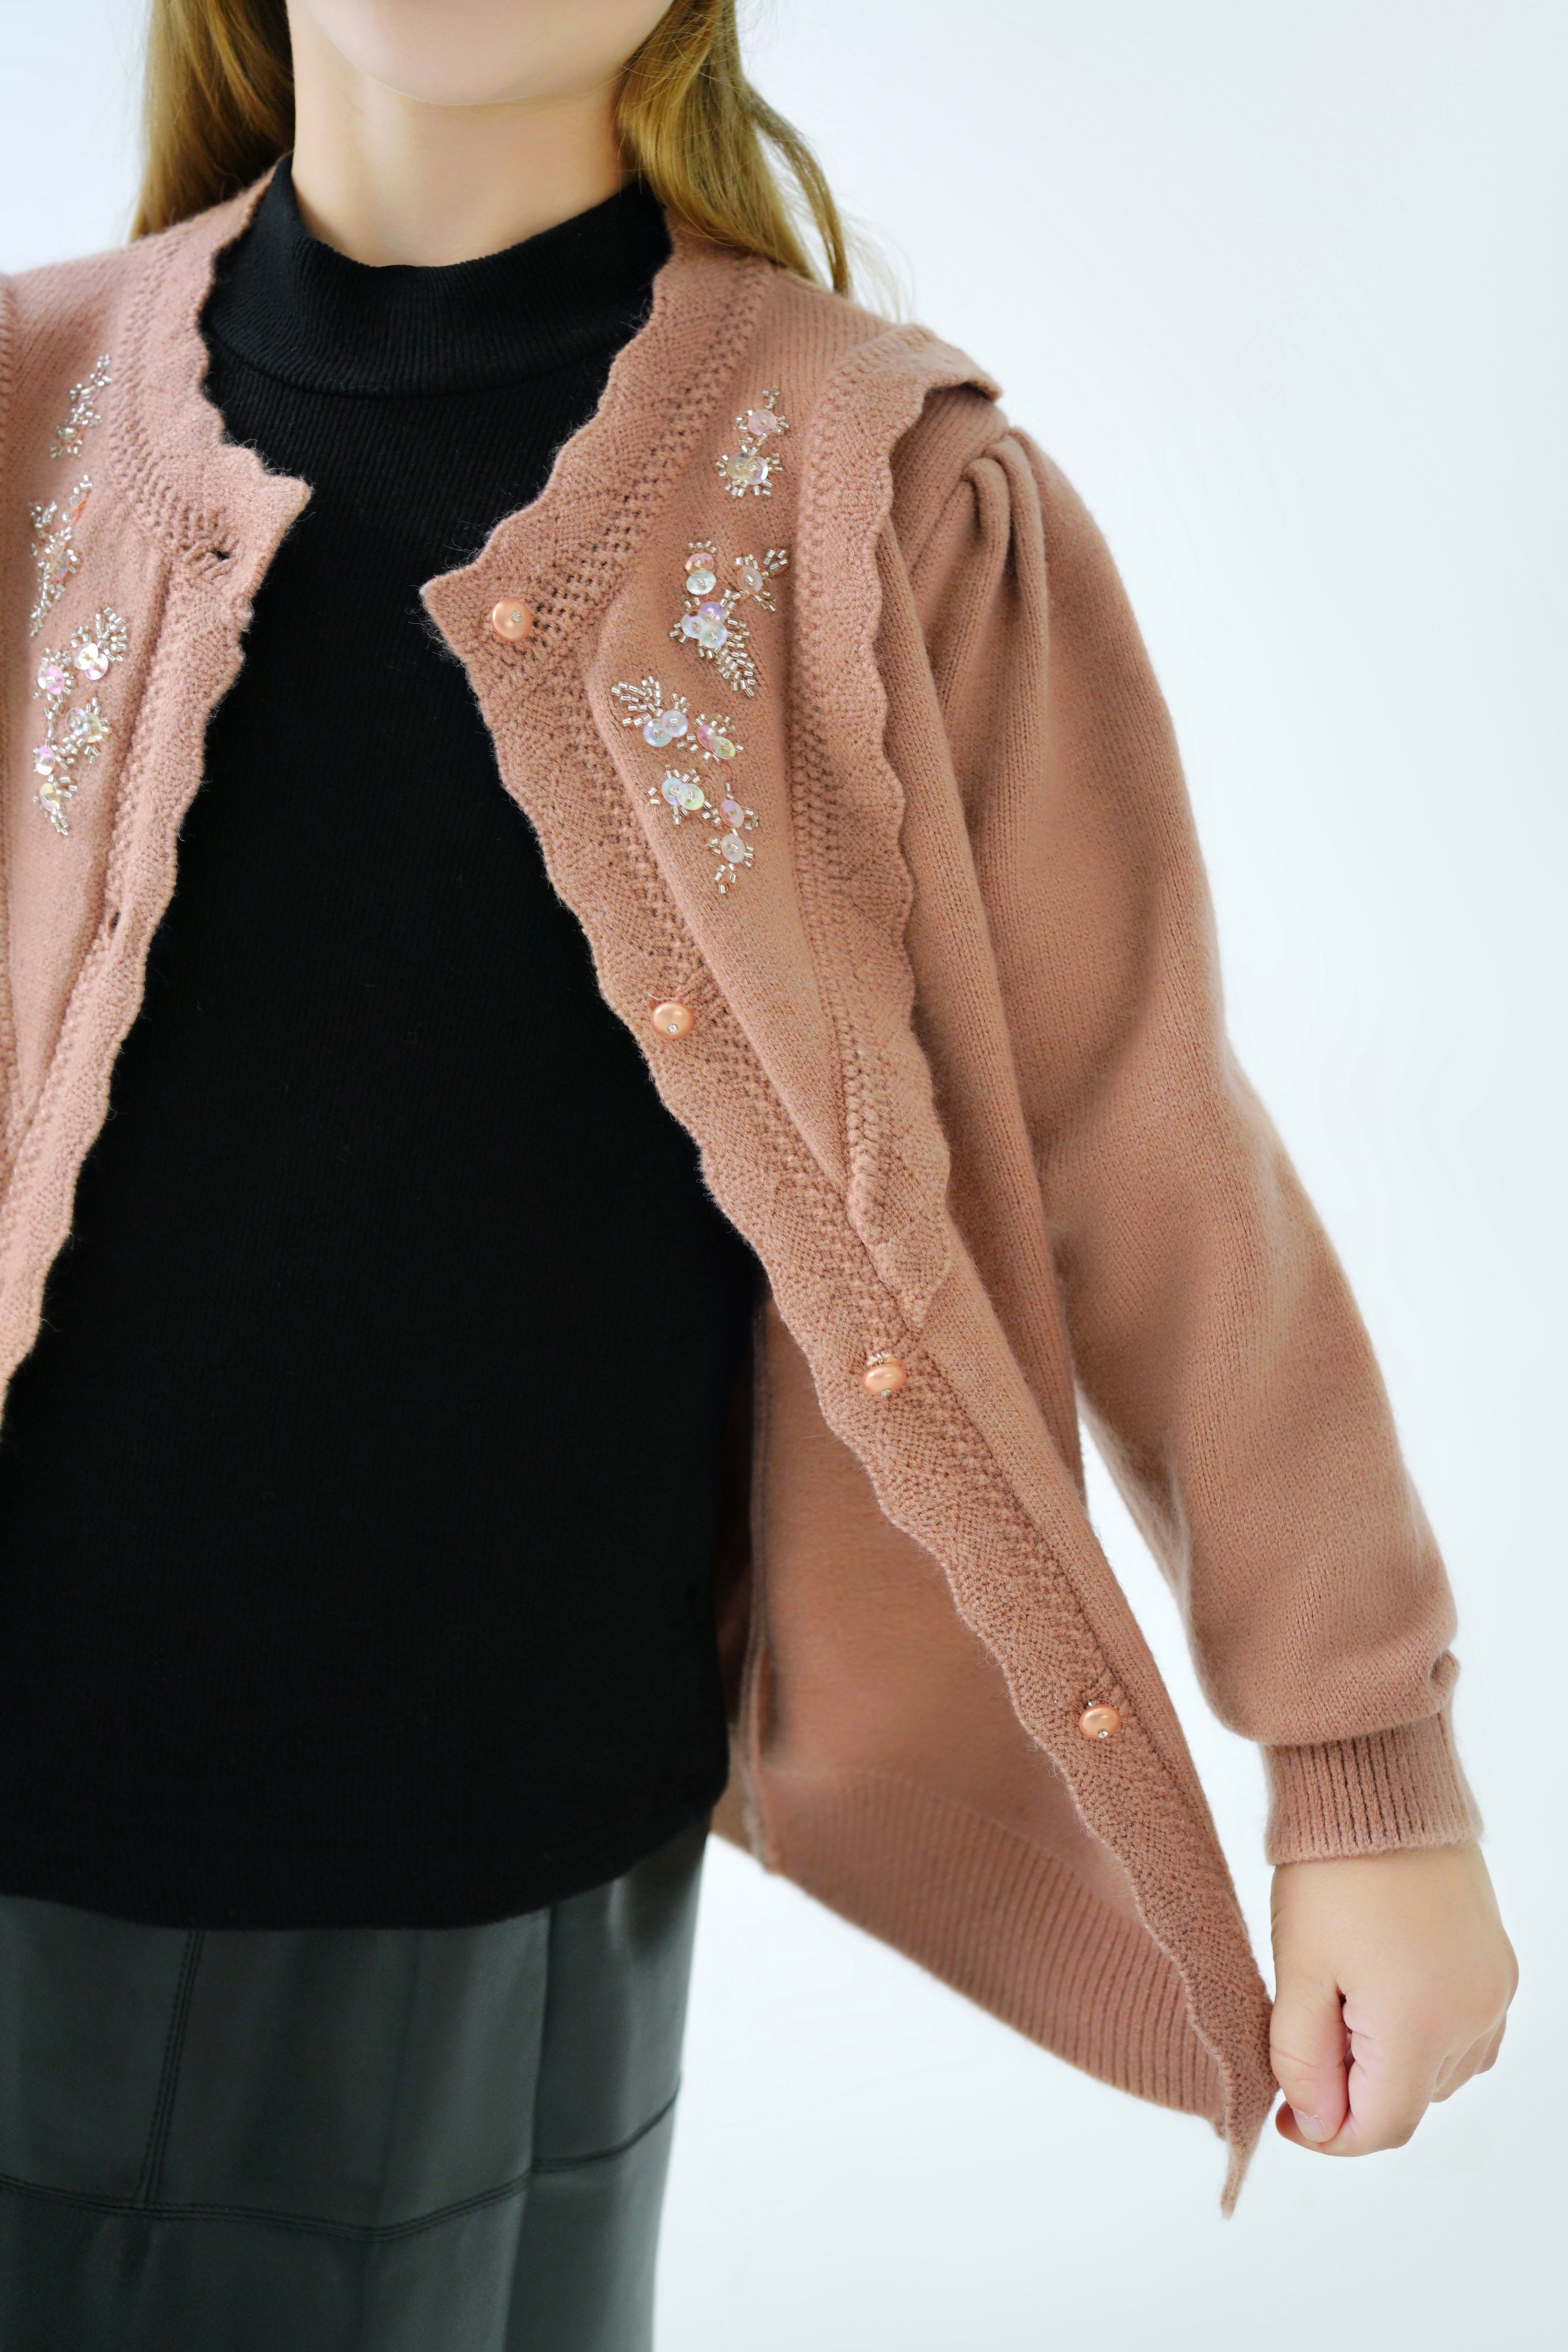 Lace Cardigan in Pink KJK2310A25